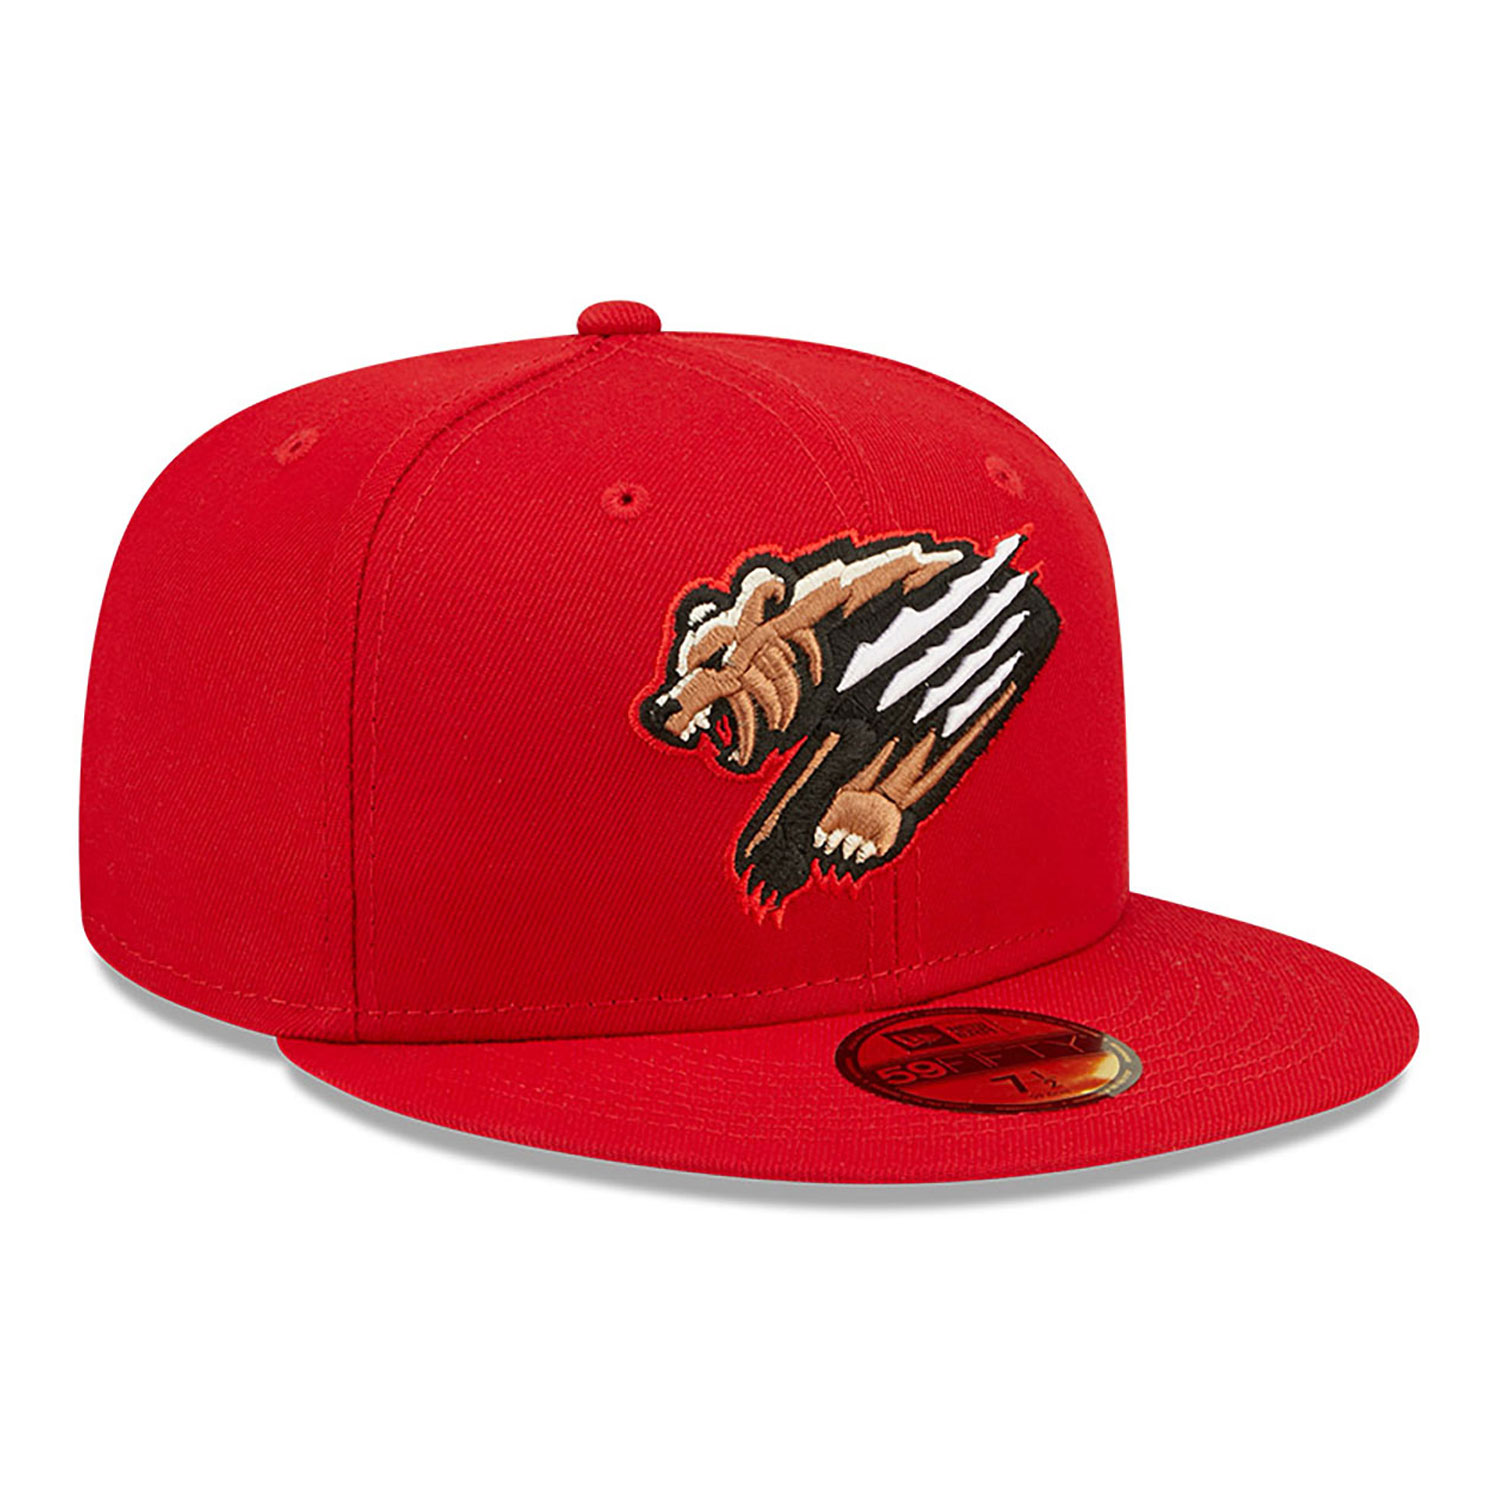 Fresno Grizzlies MiLB Red 59FIFTY Fitted Cap